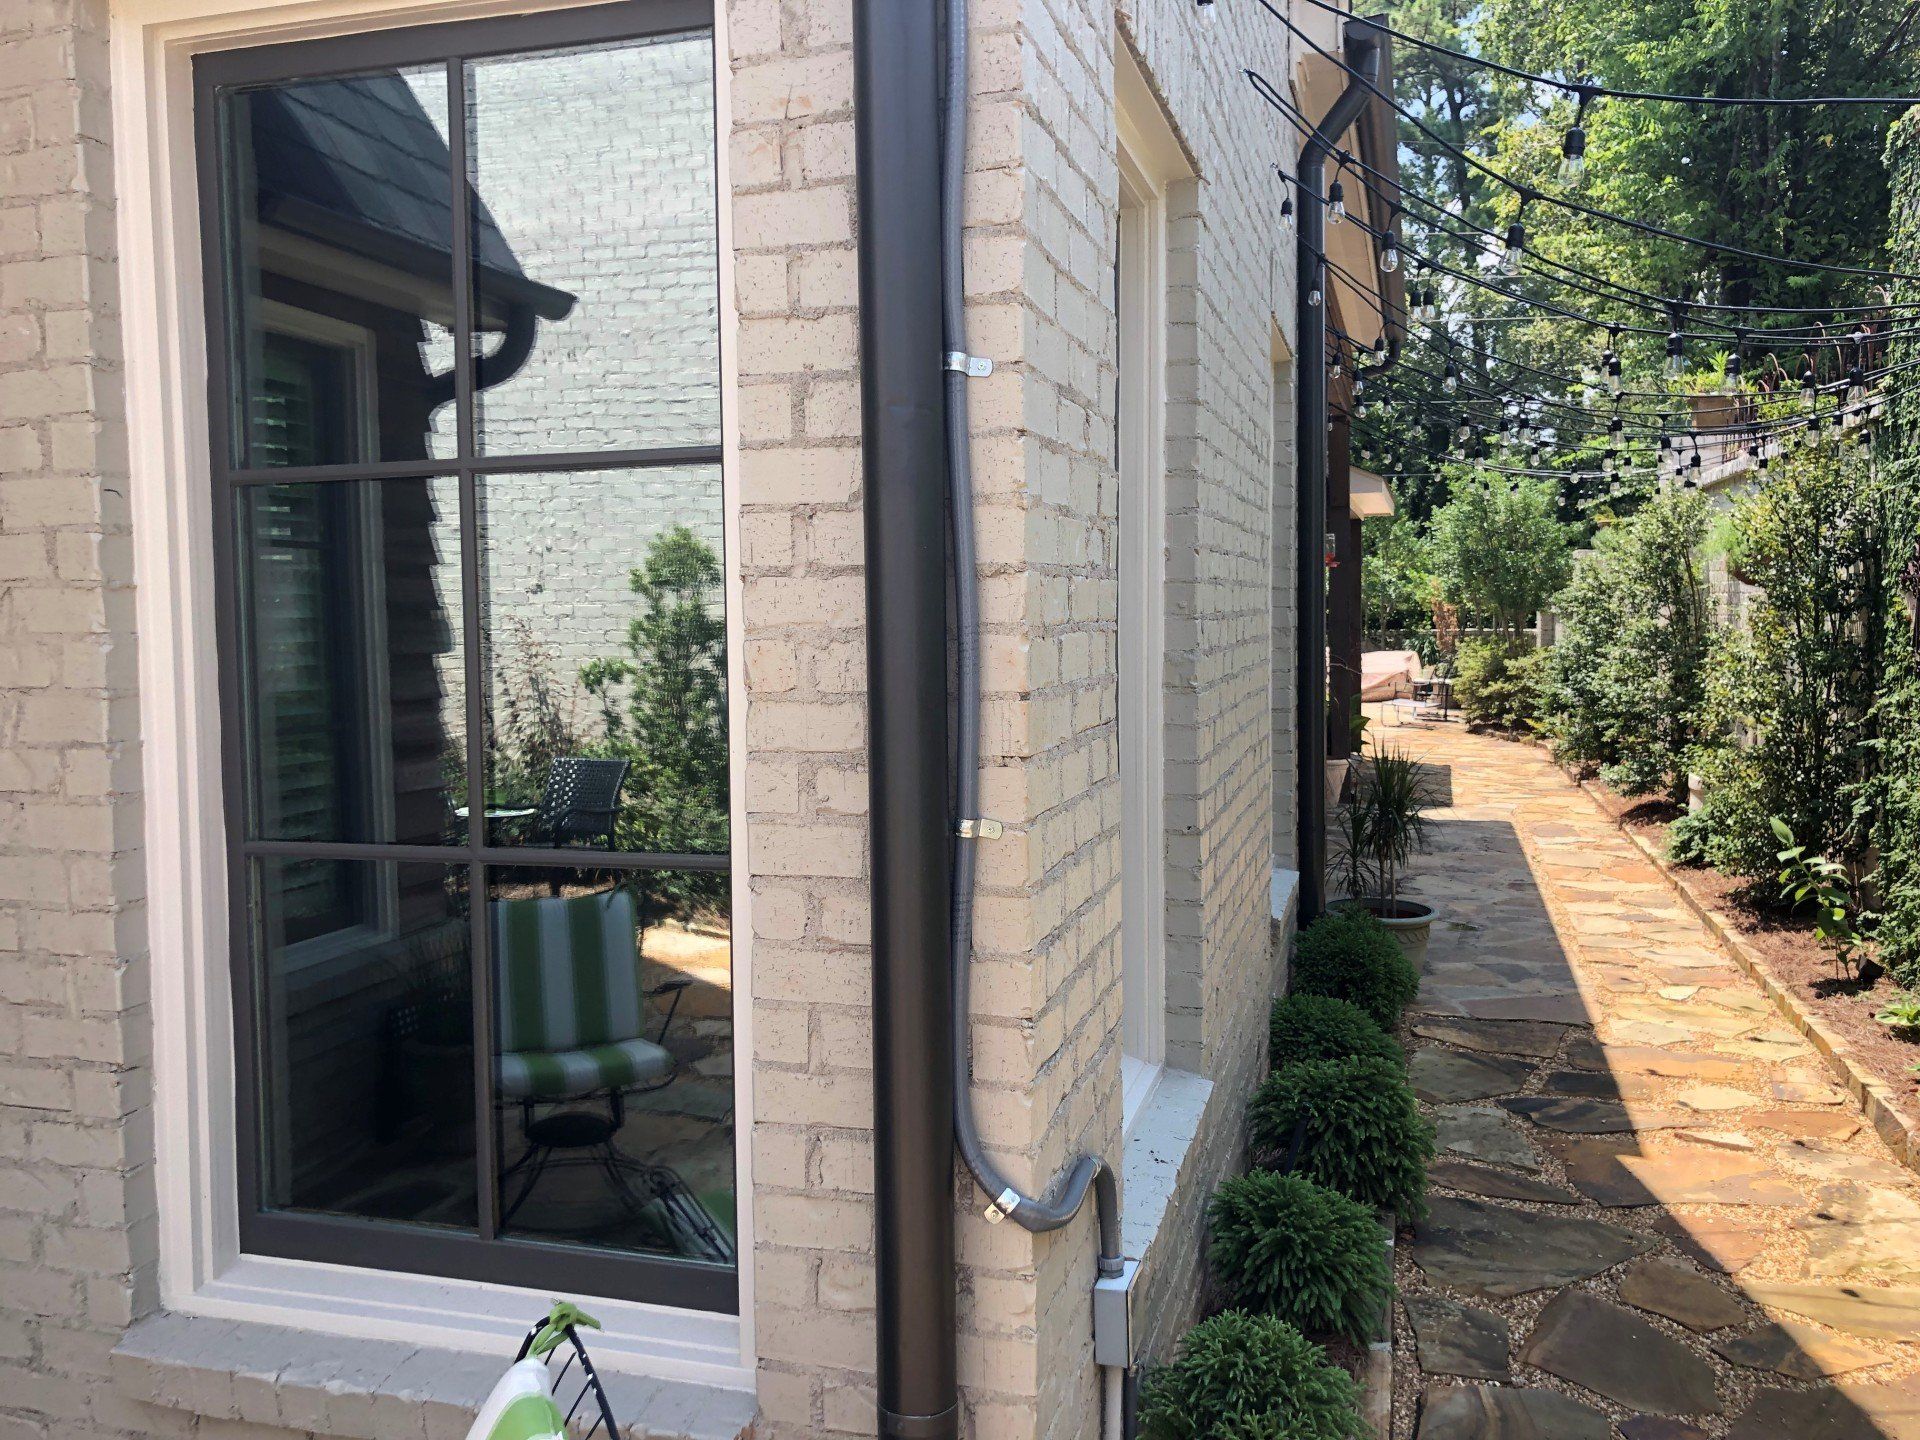 Residential tinting service in Birmingham AL - Now the ideal light inside this Birmingham home is set, while energy costs have been cut in half after SPF Rose Tint was installed in Birmingham